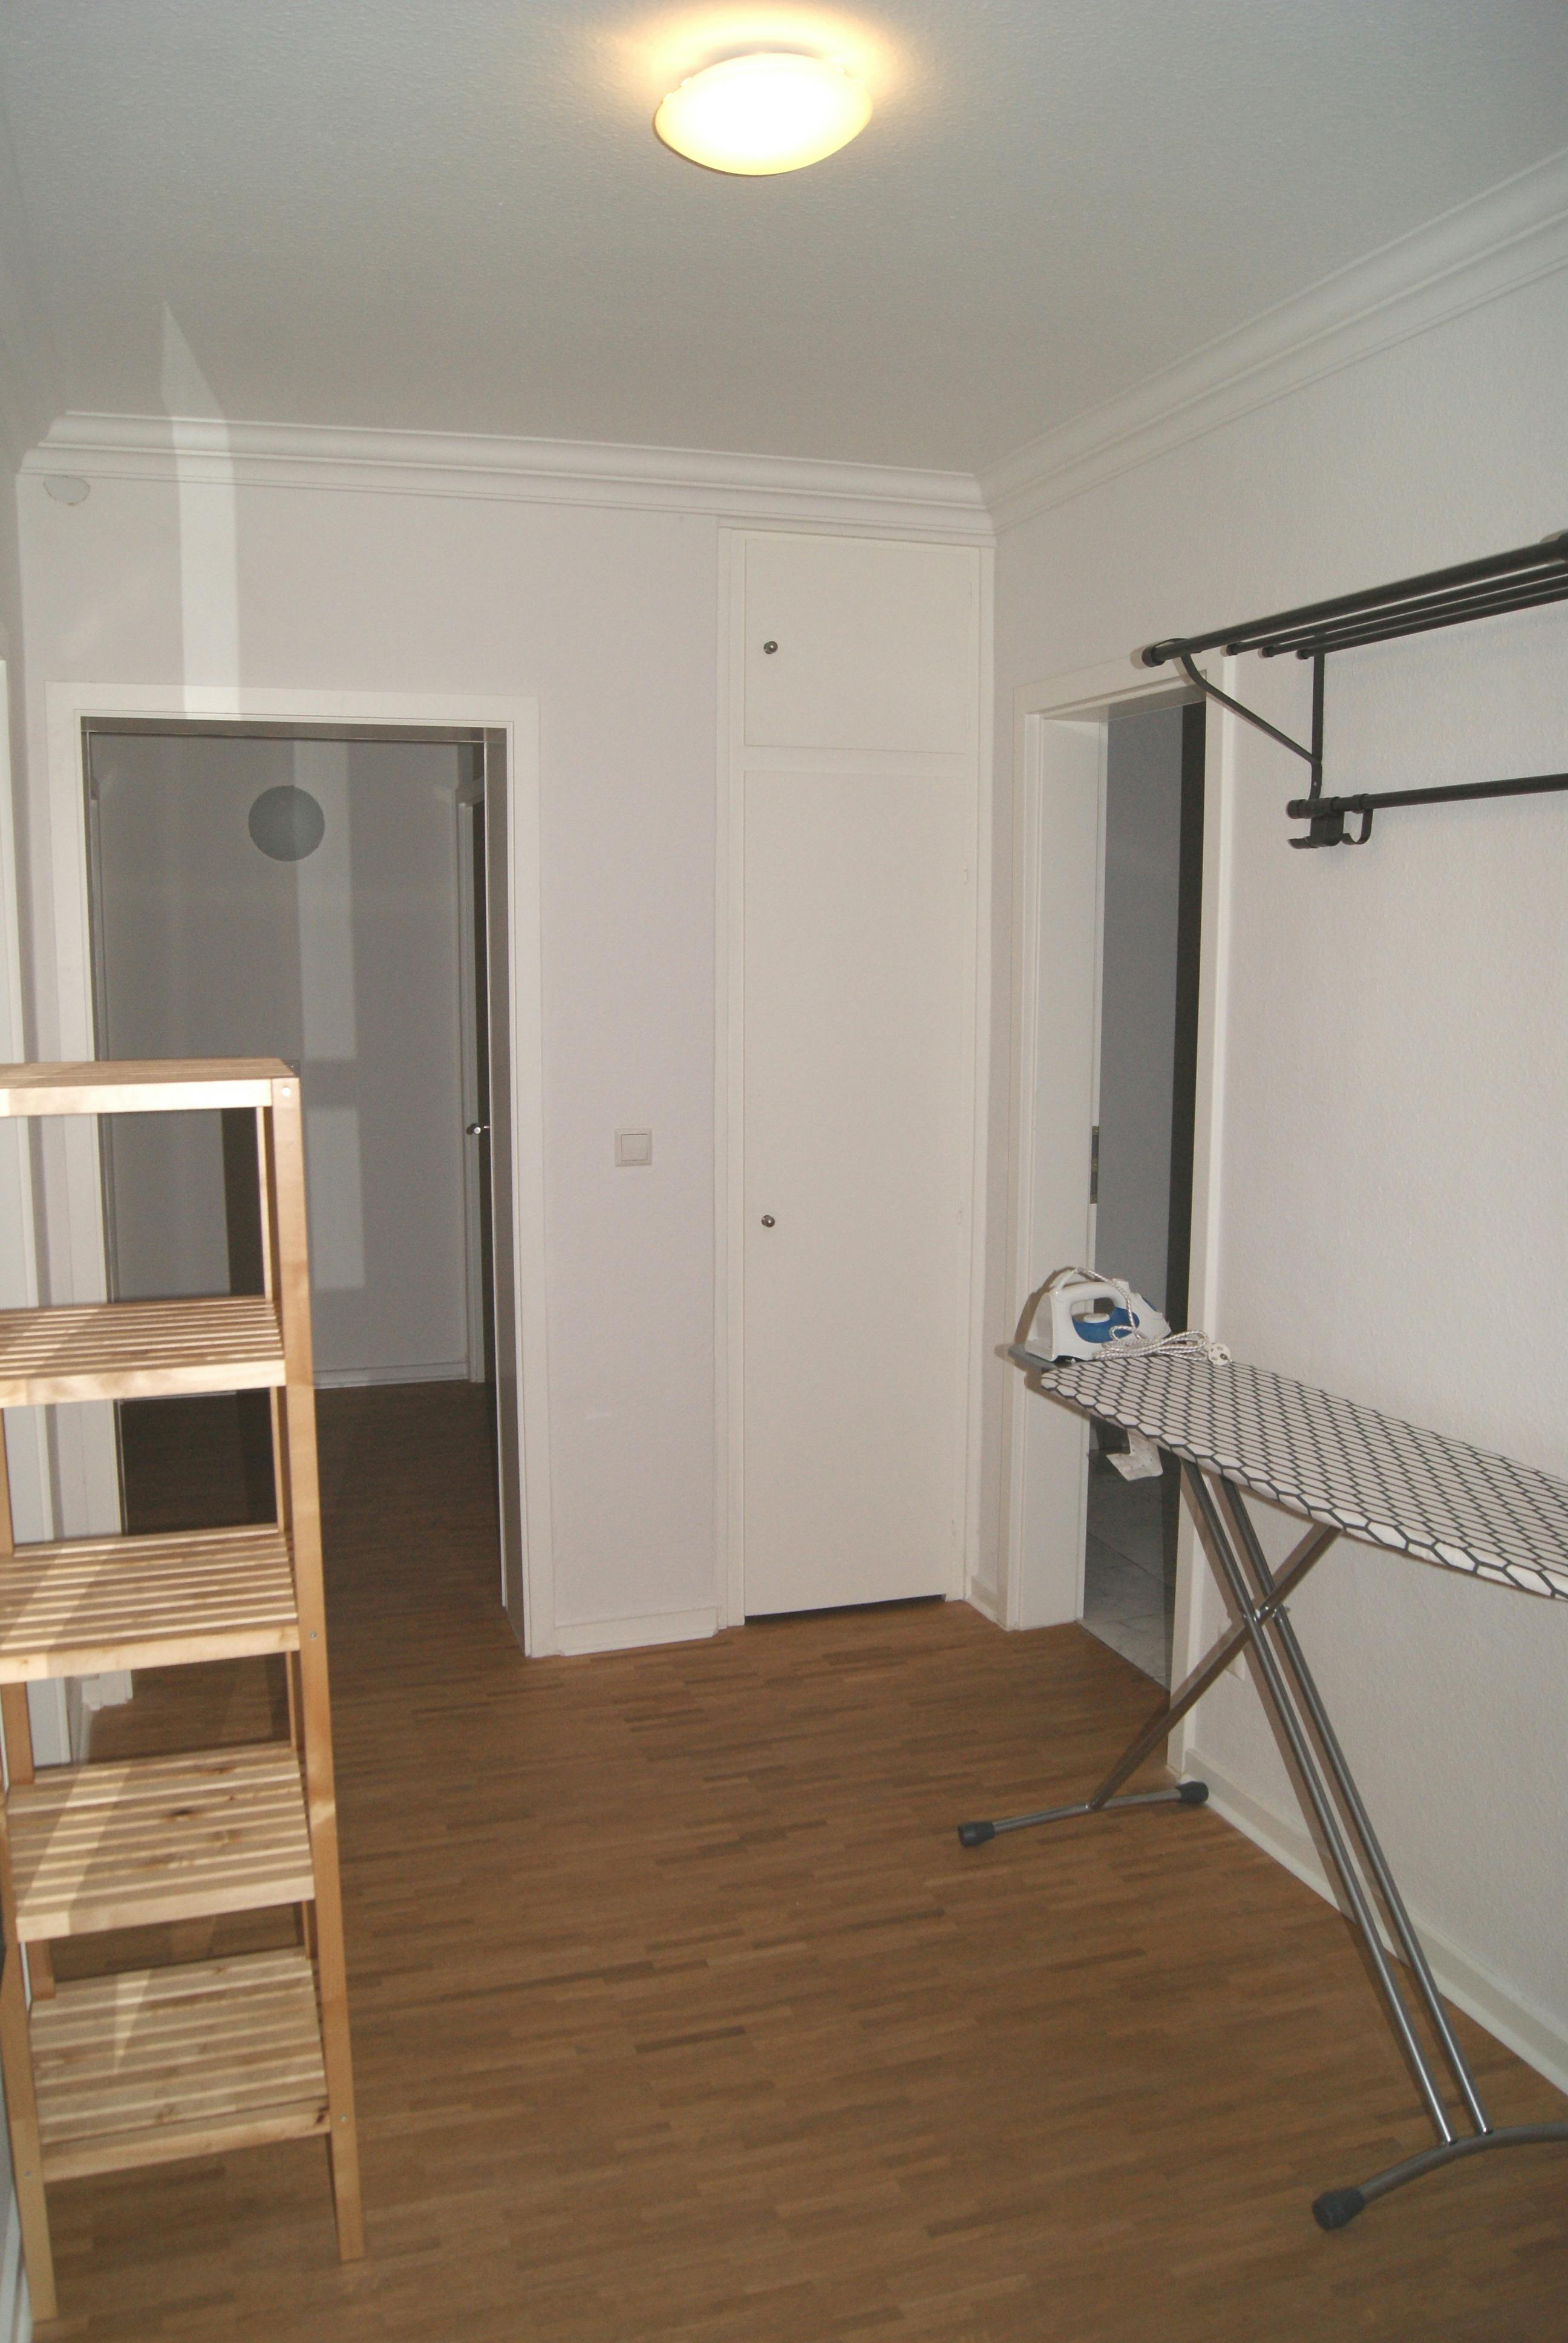 Image of the room